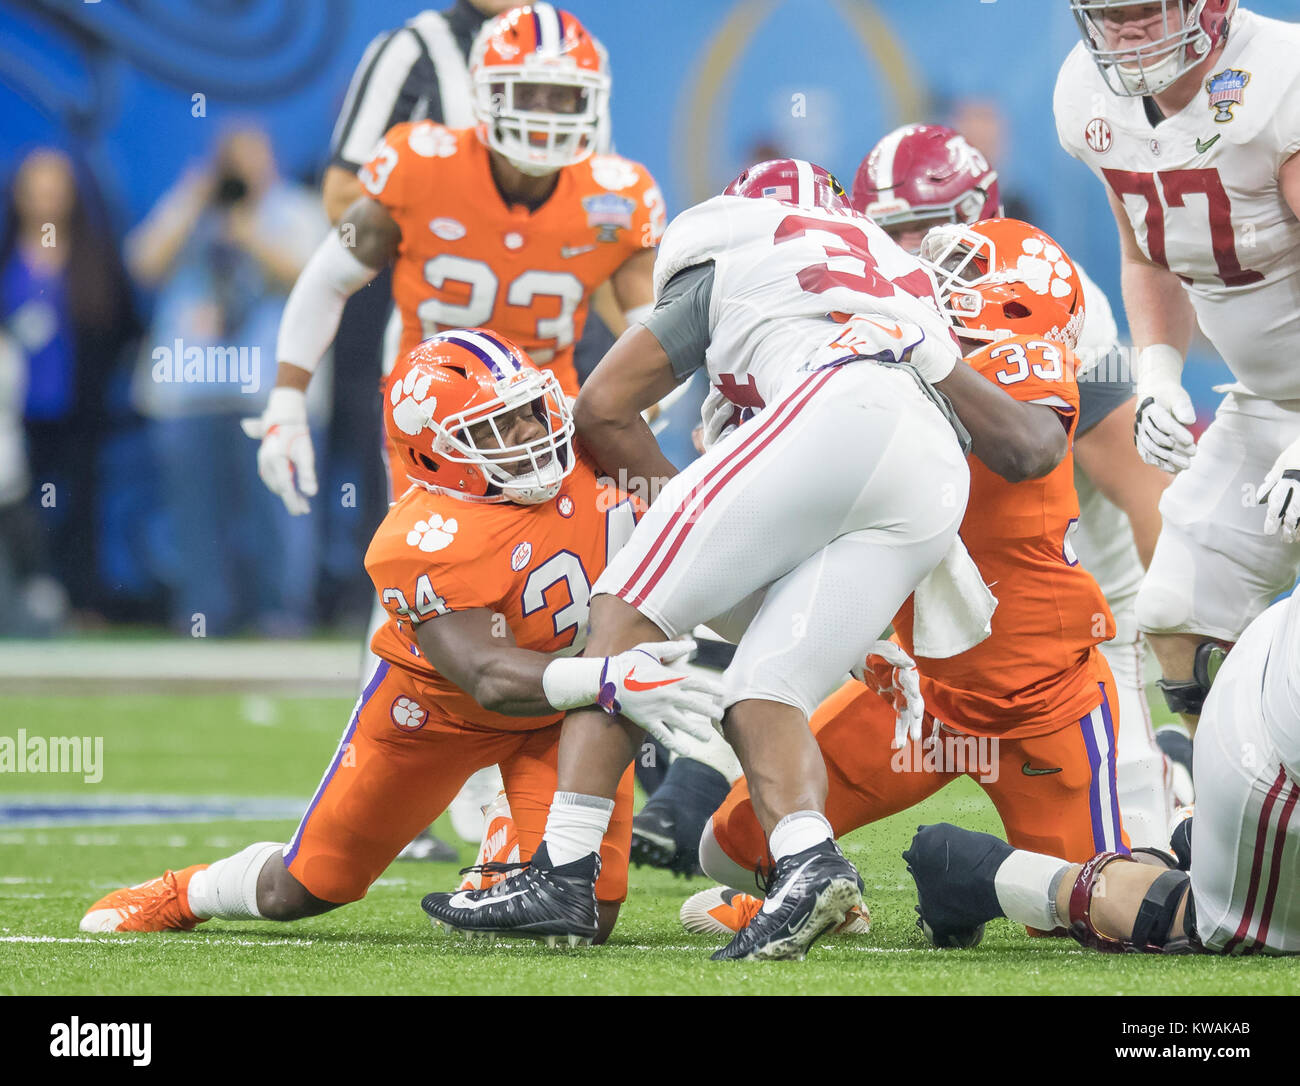 New Orleans, LA, USA. 1st Jan, 2018. Clemson defenders Kendall Joseph #34 and J.D Davis #33 team up to tackle Alabama RB Damien Harris #34 during the Allstate Sugar Bowl football game between the Clemson Tigers and the Alabama Crimson Tide at the Mercedes-Benz Supedome in New Orleans, LA. Kyle Okita/CSM/Alamy Live News Stock Photo